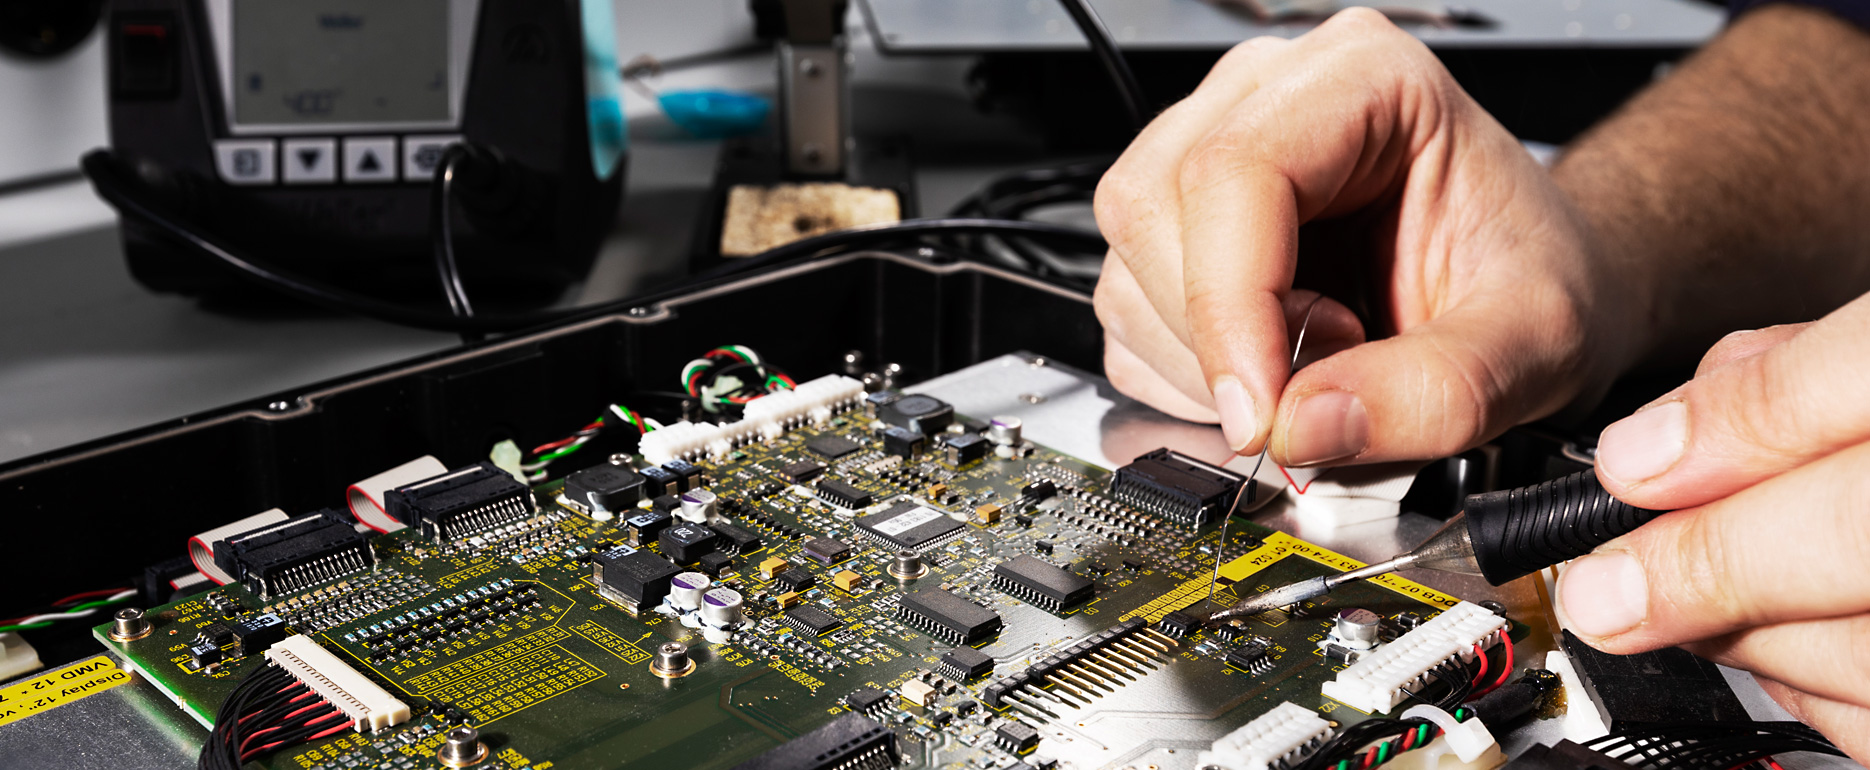 A developer repairs an electronic device